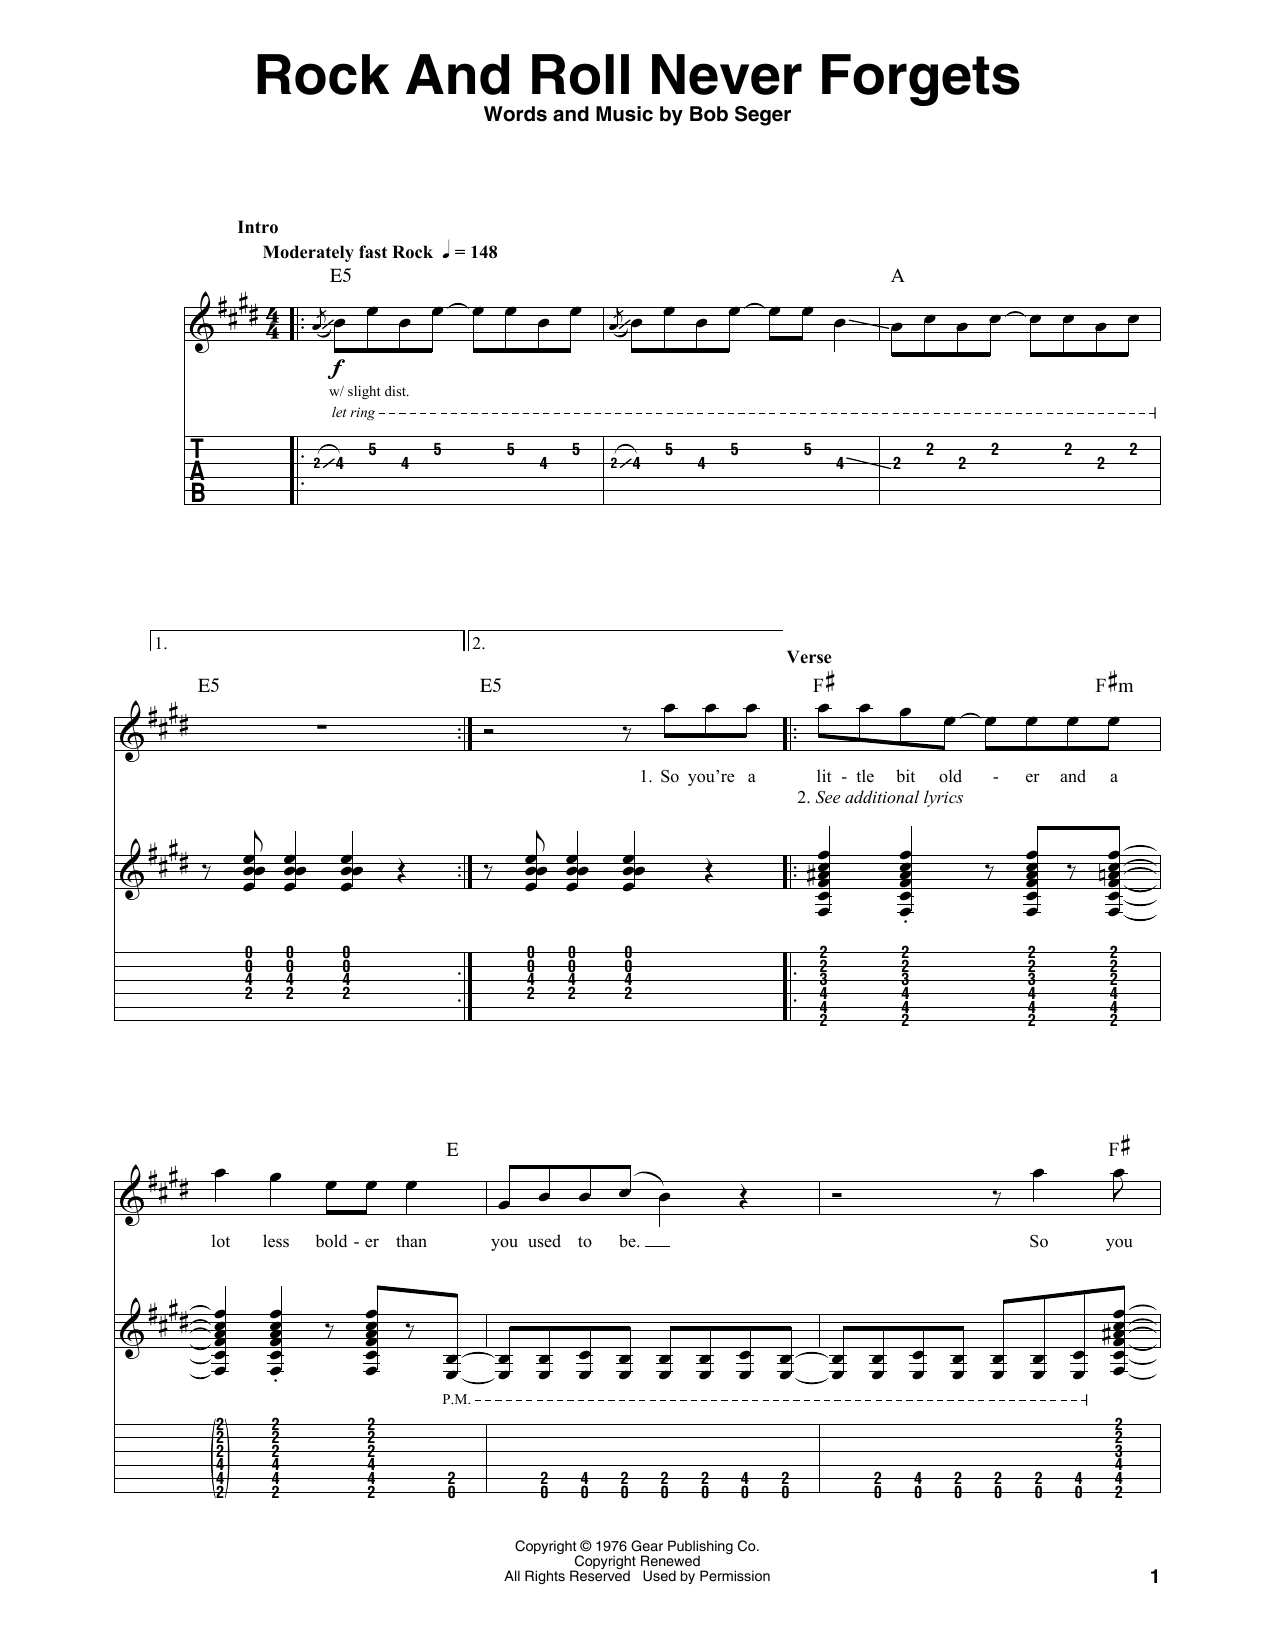 Download Bob Seger Rock And Roll Never Forgets Sheet Music